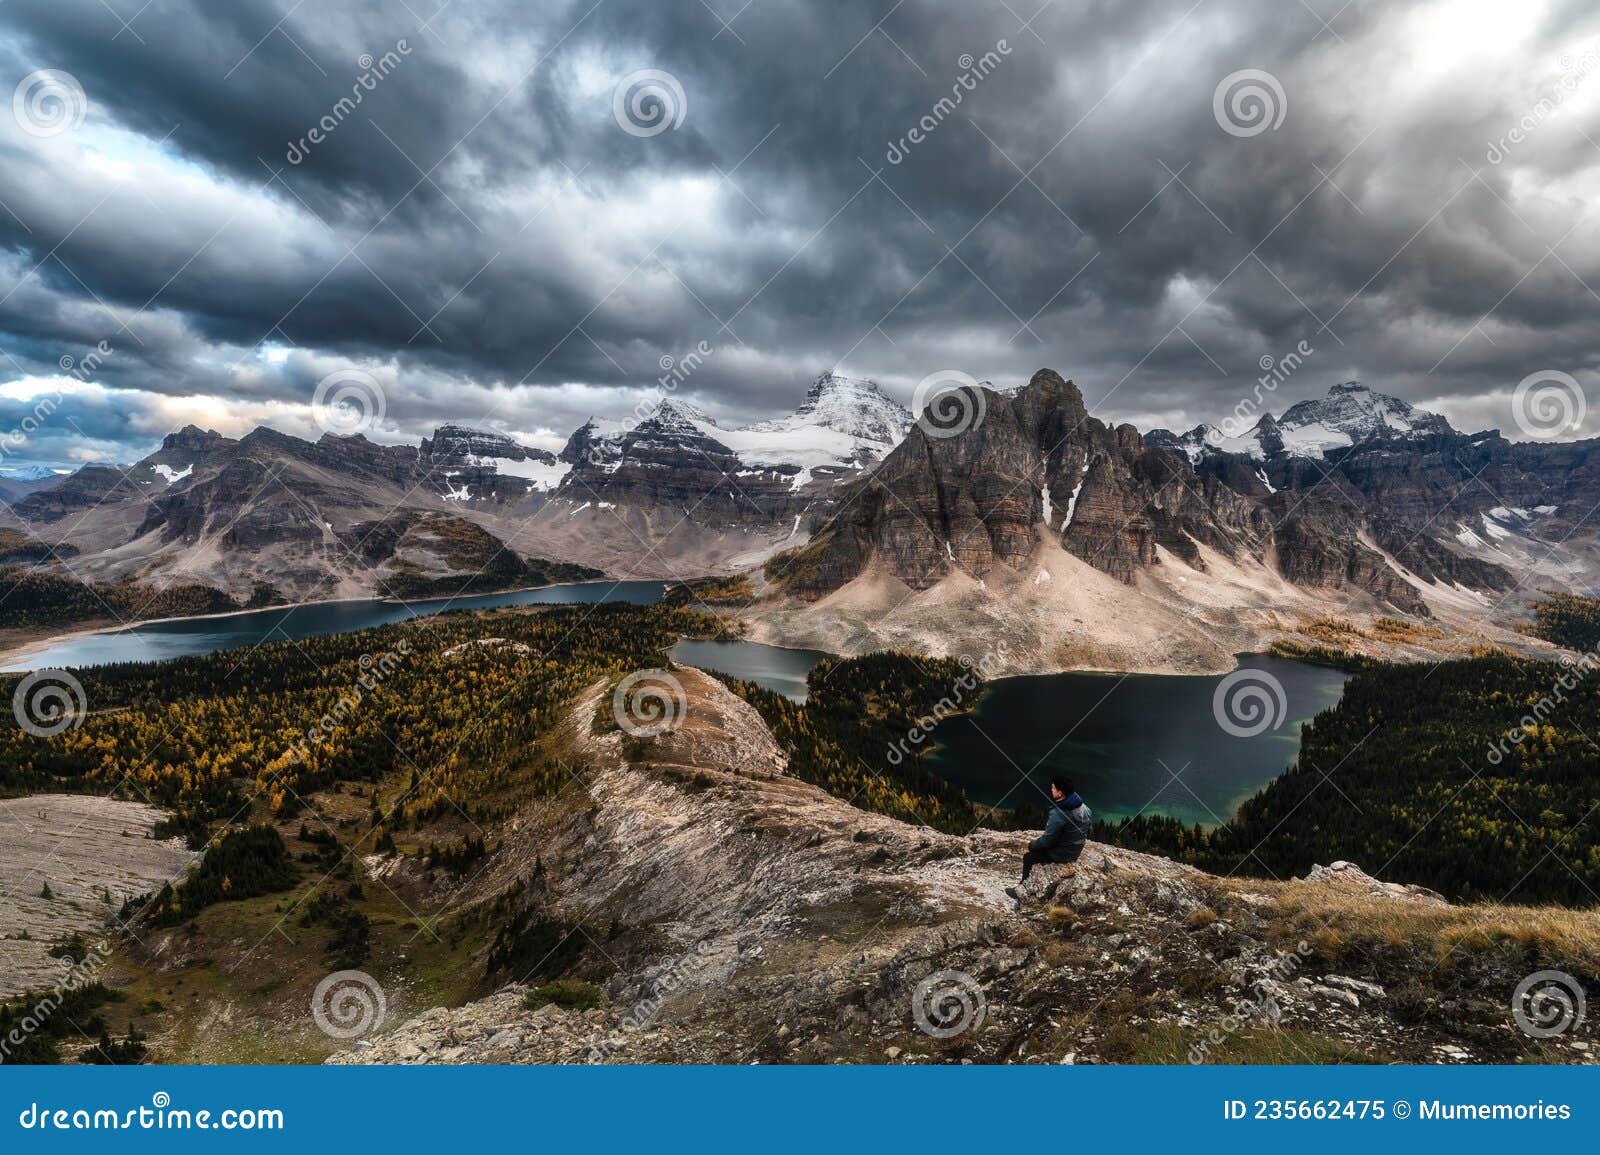 mount assiniboine with dramatic sky on nublet peak in provincial park